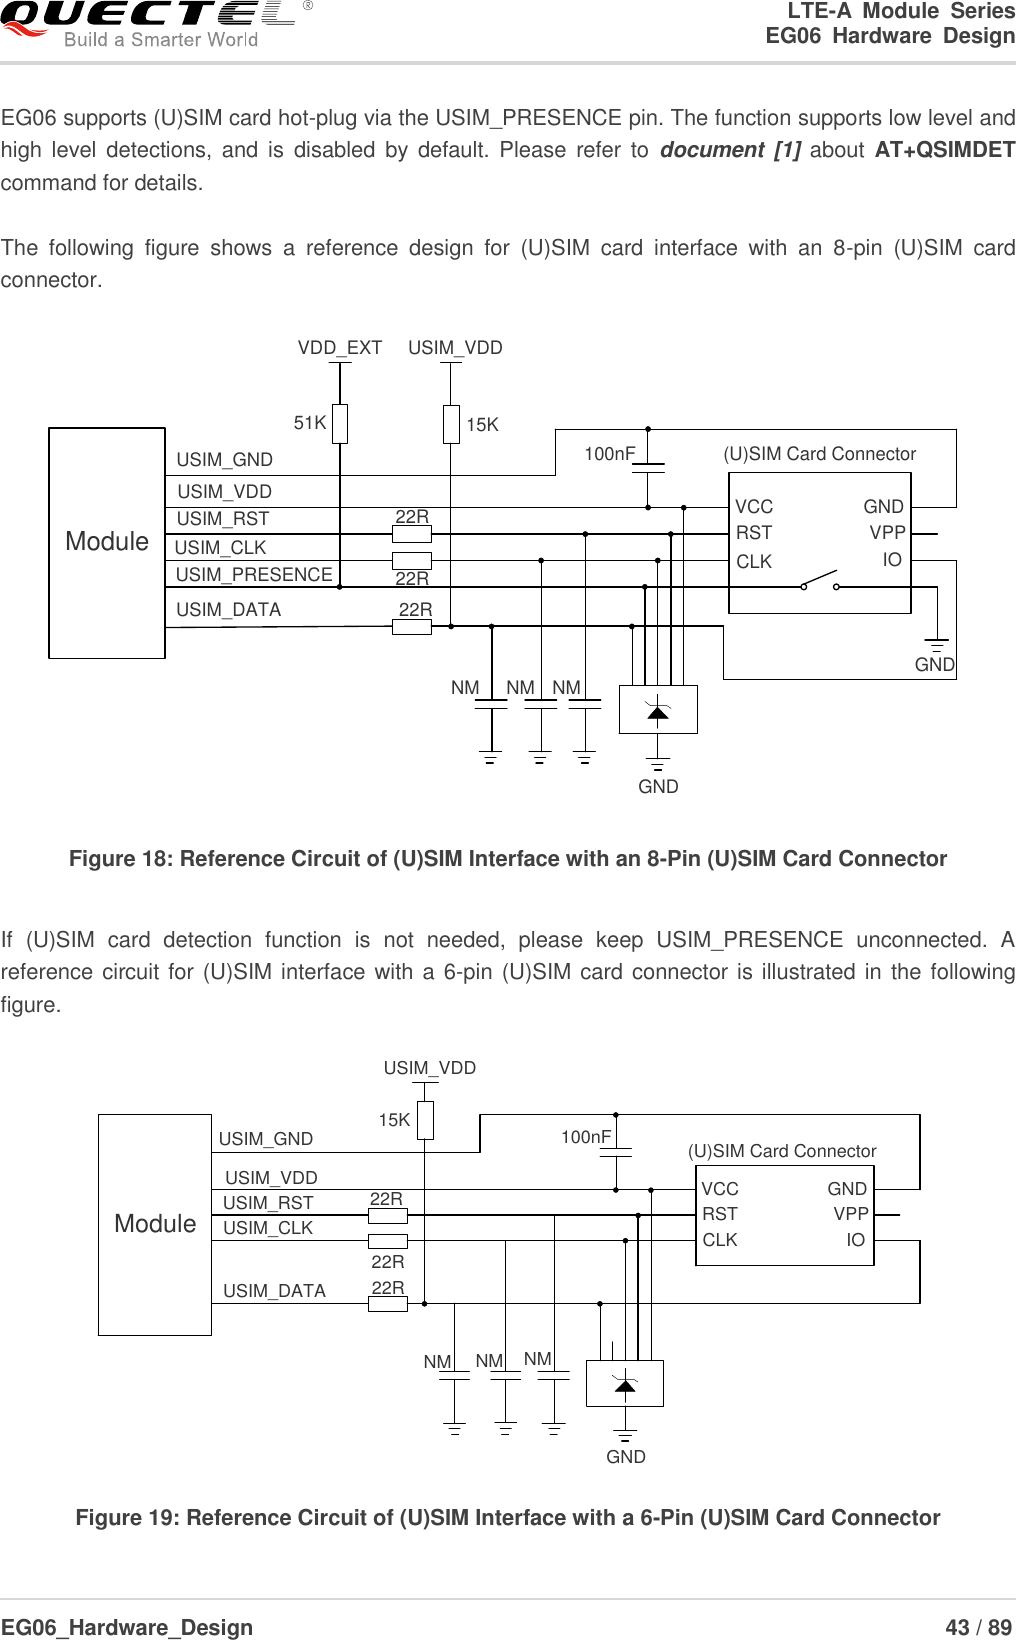 LTE-A  Module  Series                                                  EG06  Hardware  Design  EG06_Hardware_Design                                                               43 / 89    EG06 supports (U)SIM card hot-plug via the USIM_PRESENCE pin. The function supports low level and high  level detections,  and  is disabled  by default.  Please  refer to  document [1] about  AT+QSIMDET command for details.  The  following  figure  shows  a  reference  design  for  (U)SIM  card  interface  with  an  8-pin  (U)SIM  card connector. ModuleUSIM_VDDUSIM_GNDUSIM_RSTUSIM_CLKUSIM_DATAUSIM_PRESENCE22R22R22RVDD_EXT51K100nF (U)SIM Card ConnectorGNDGNDVCCRSTCLK IOVPPGNDUSIM_VDD15KNM NM NM Figure 18: Reference Circuit of (U)SIM Interface with an 8-Pin (U)SIM Card Connector  If  (U)SIM  card  detection  function  is  not  needed,  please  keep  USIM_PRESENCE  unconnected.  A reference circuit for (U)SIM interface with a 6-pin (U)SIM card connector is illustrated in the following figure. ModuleUSIM_VDDUSIM_GNDUSIM_RSTUSIM_CLKUSIM_DATA 22R22R22R100nF (U)SIM Card ConnectorGNDVCCRSTCLK IOVPPGND15KUSIM_VDDNM NMNM Figure 19: Reference Circuit of (U)SIM Interface with a 6-Pin (U)SIM Card Connector 